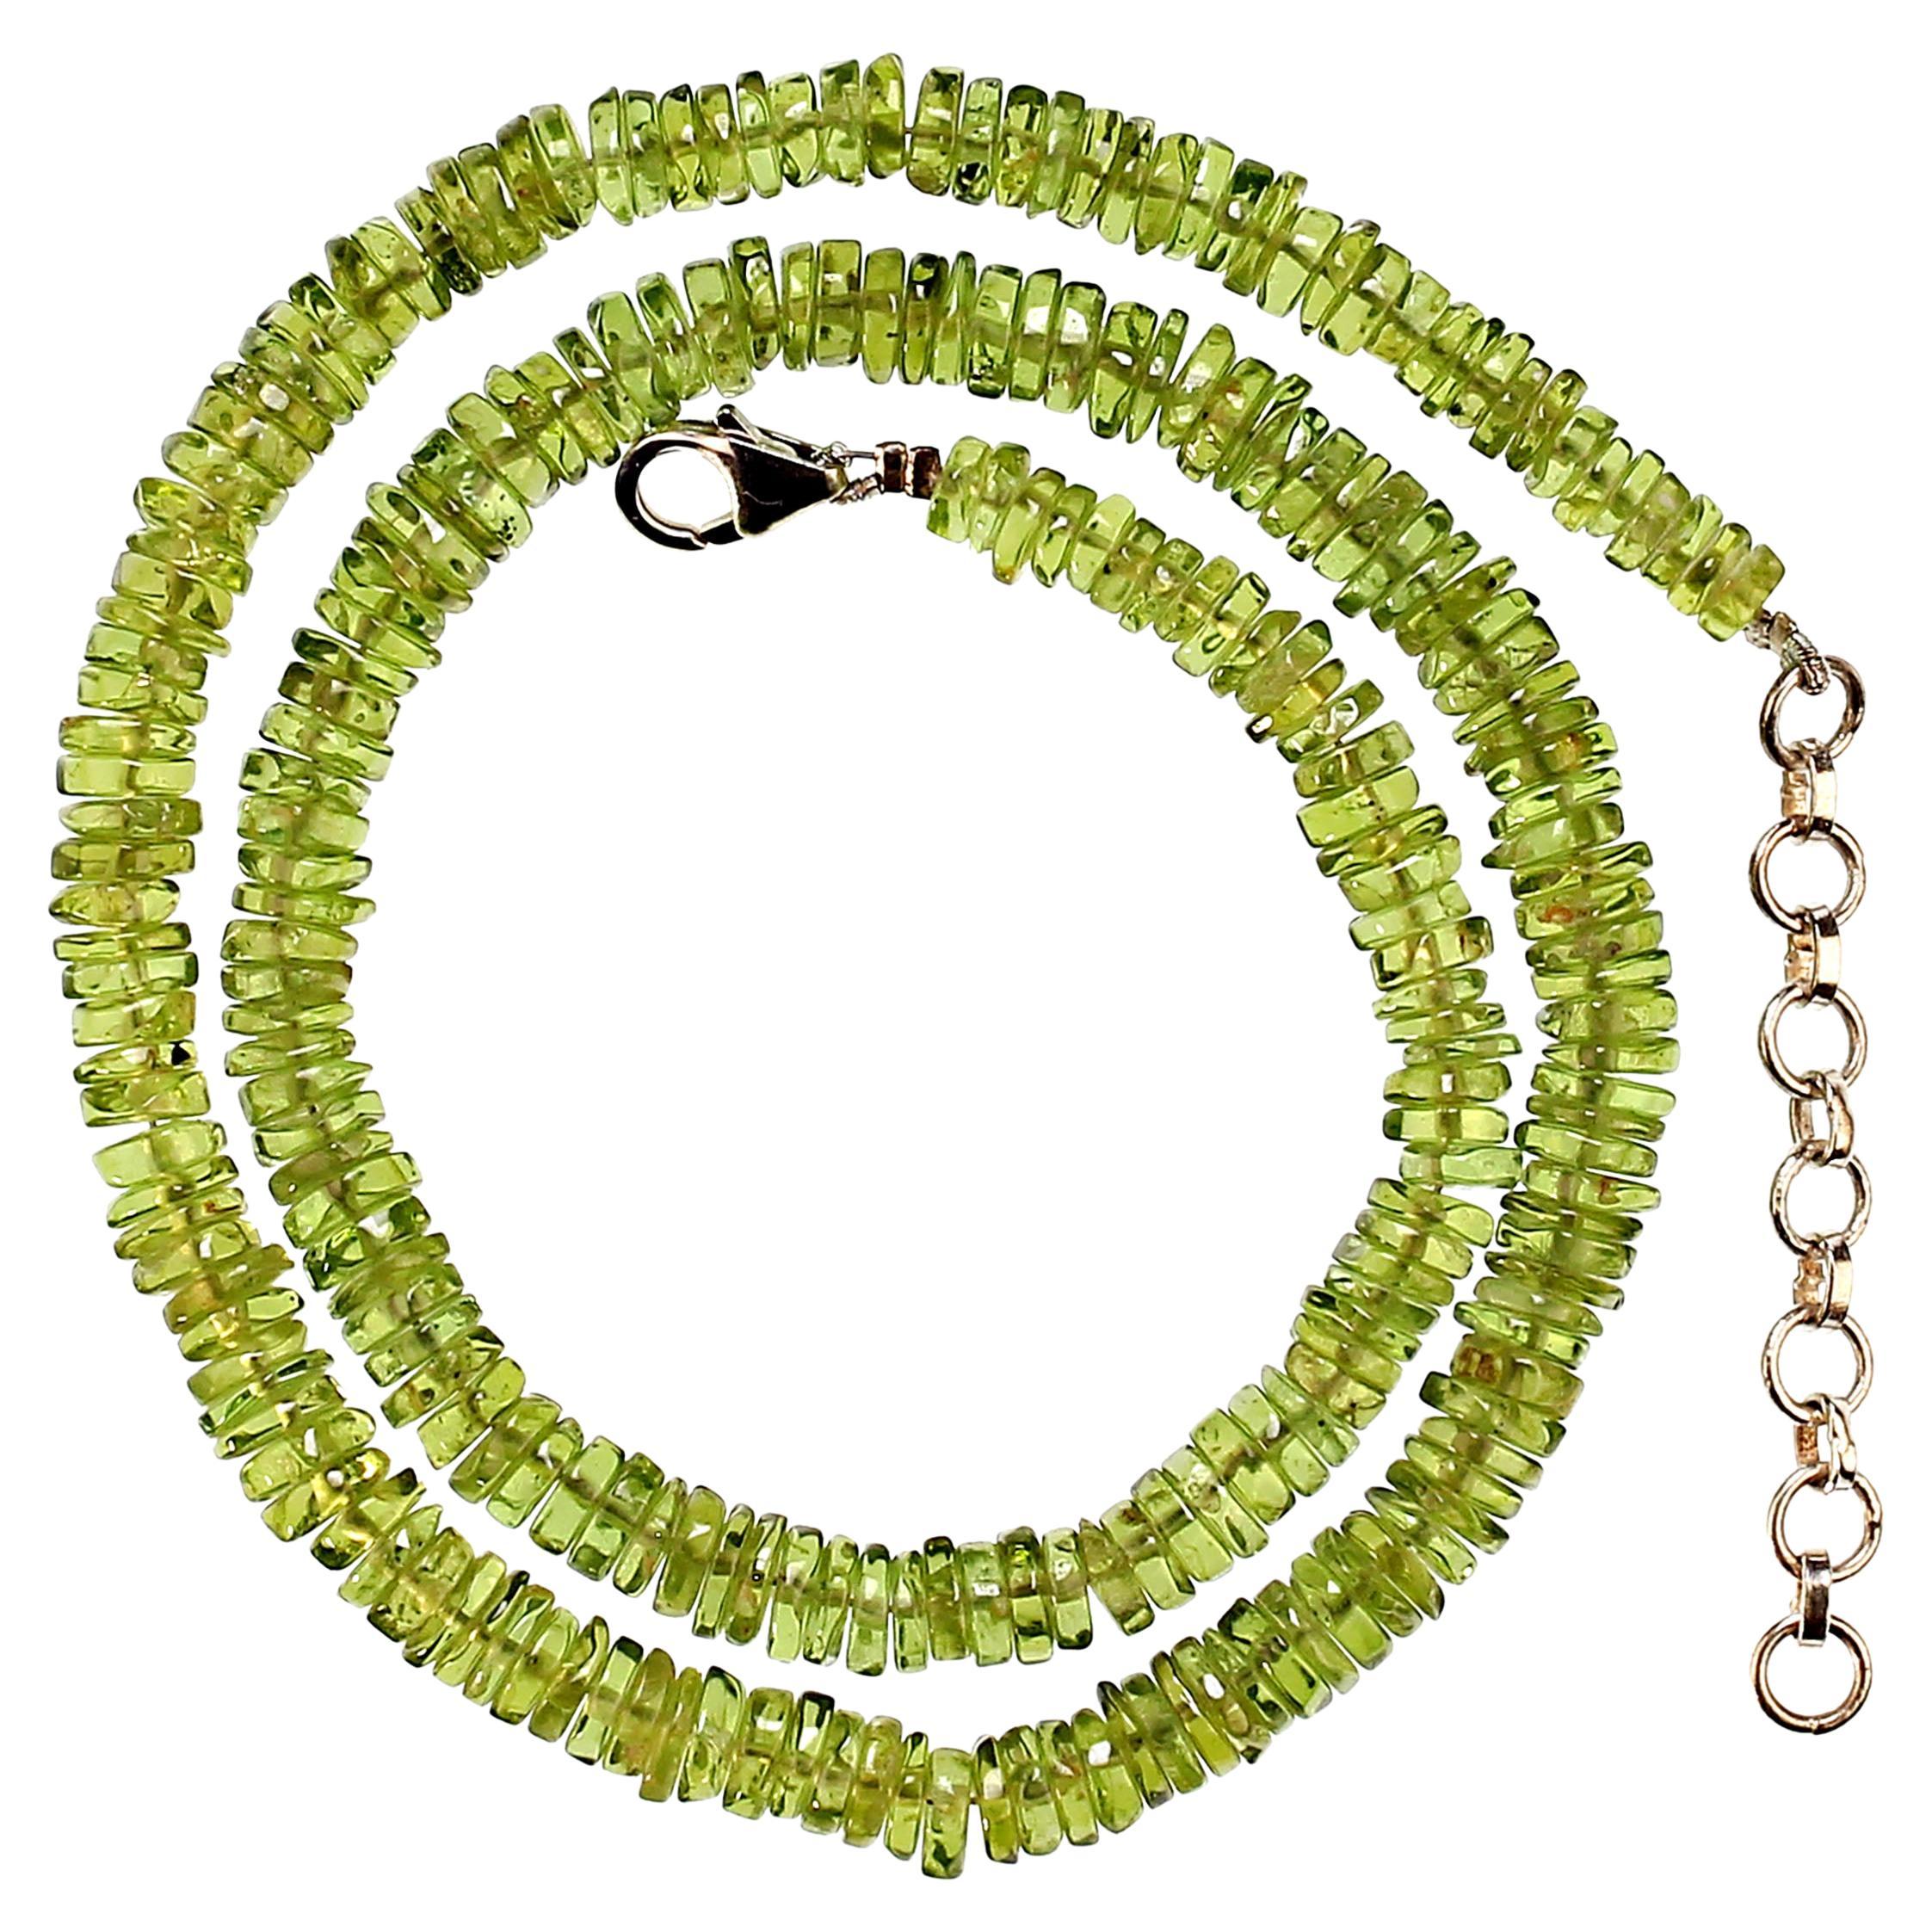 AJD 16 Inch Polished Peridot Rondelles Choker necklace  Perfect Gift! For Sale